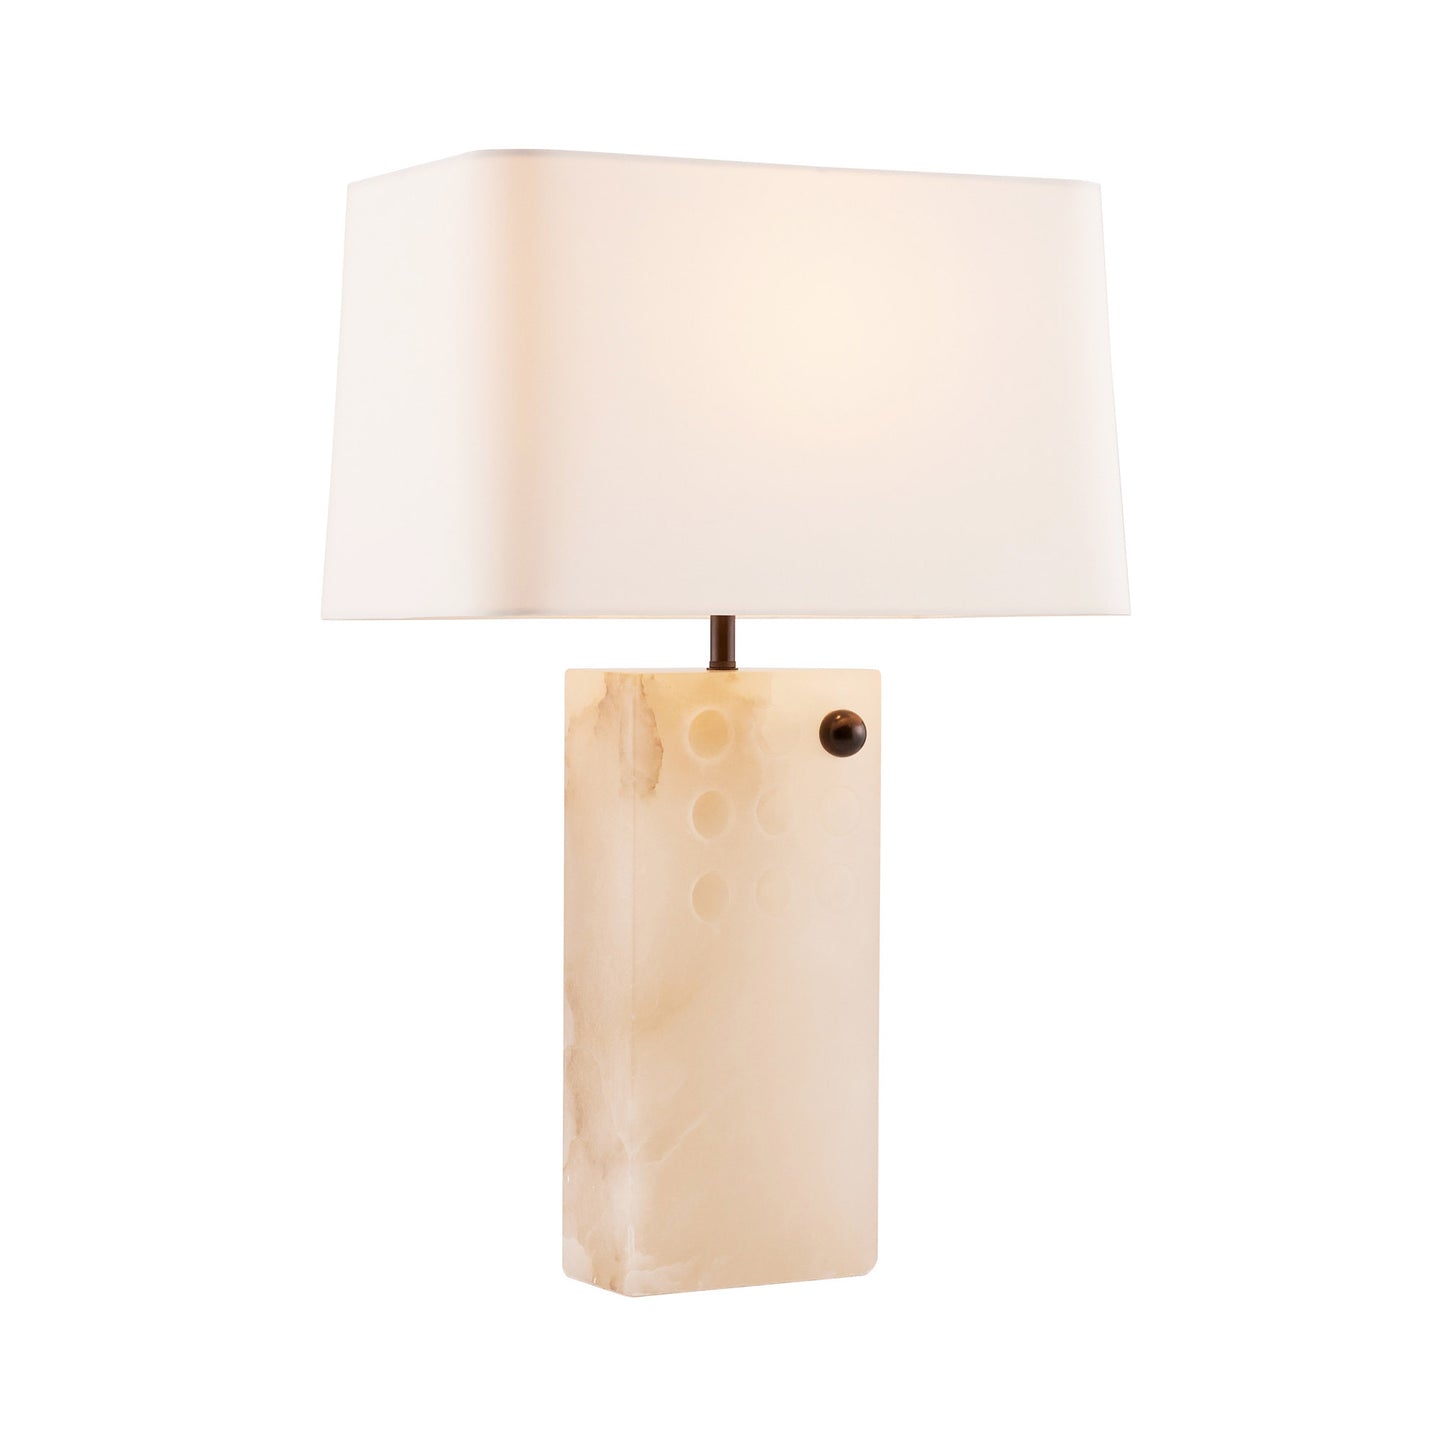 Nuevo Lamp - White Alabaster Sculptural Form with Bronze Accent